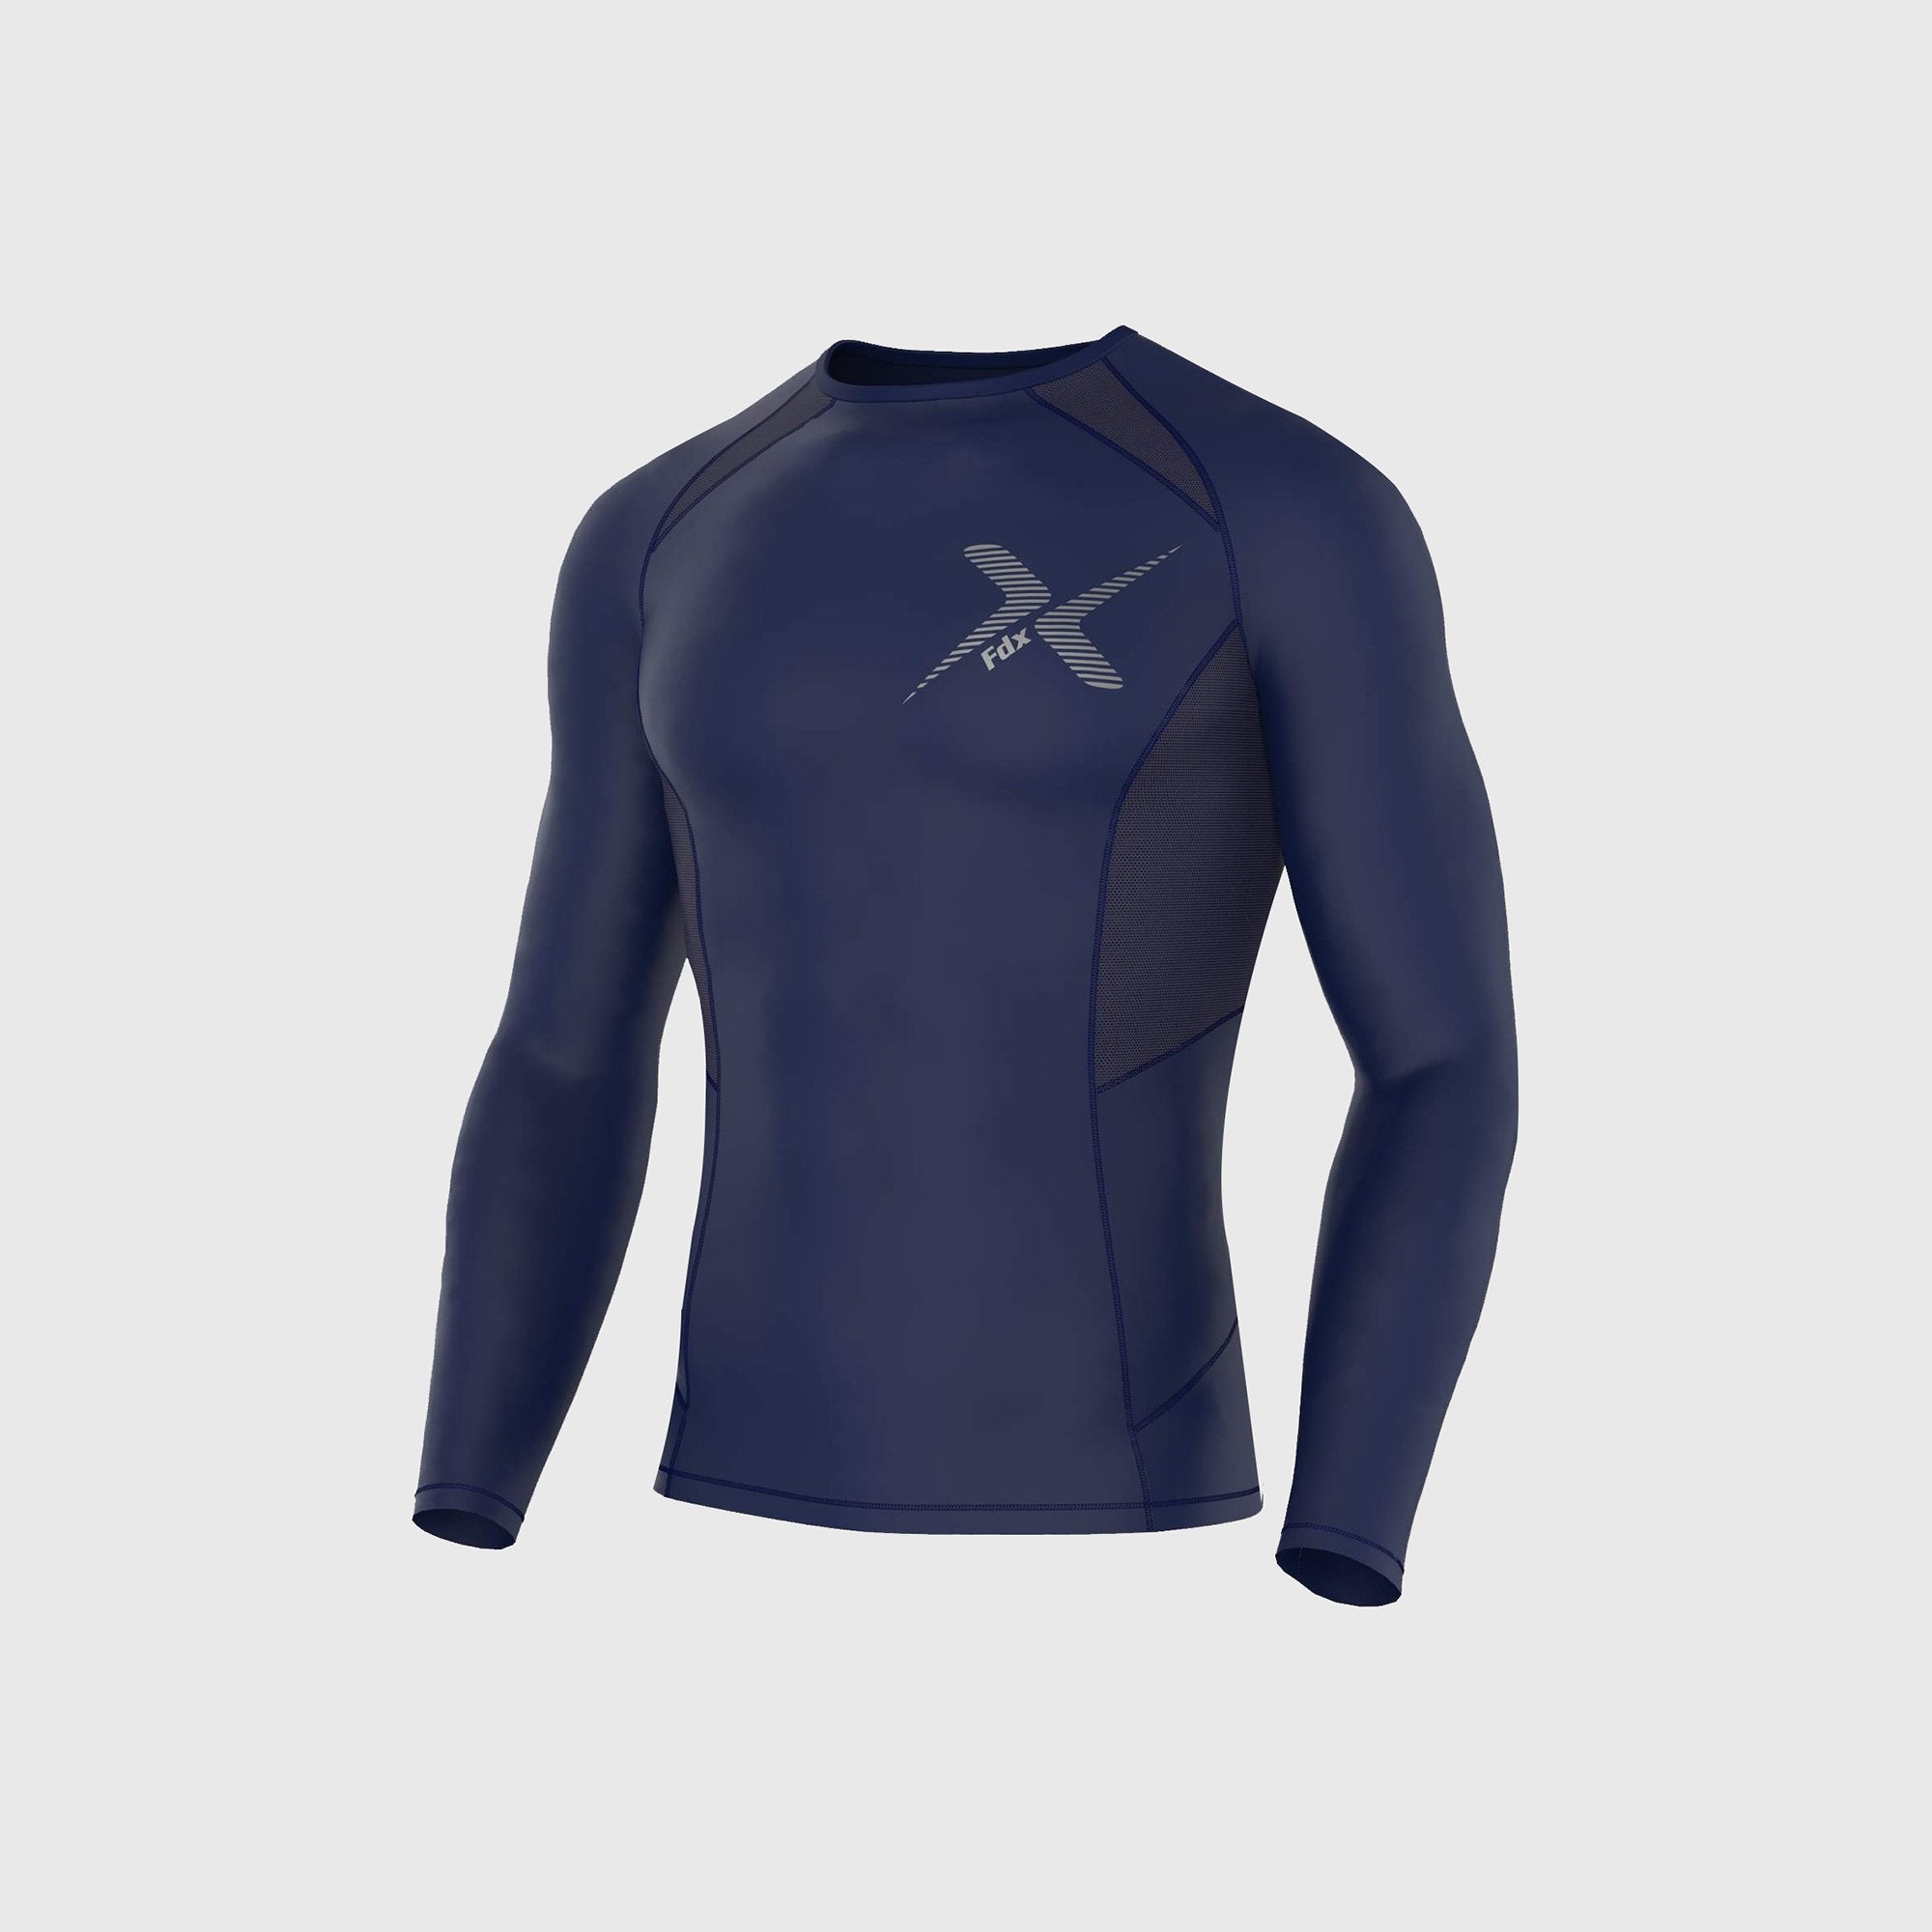 Fdx Recoil Navy Blue Men's Base Layer Thermal Winter Compression Top